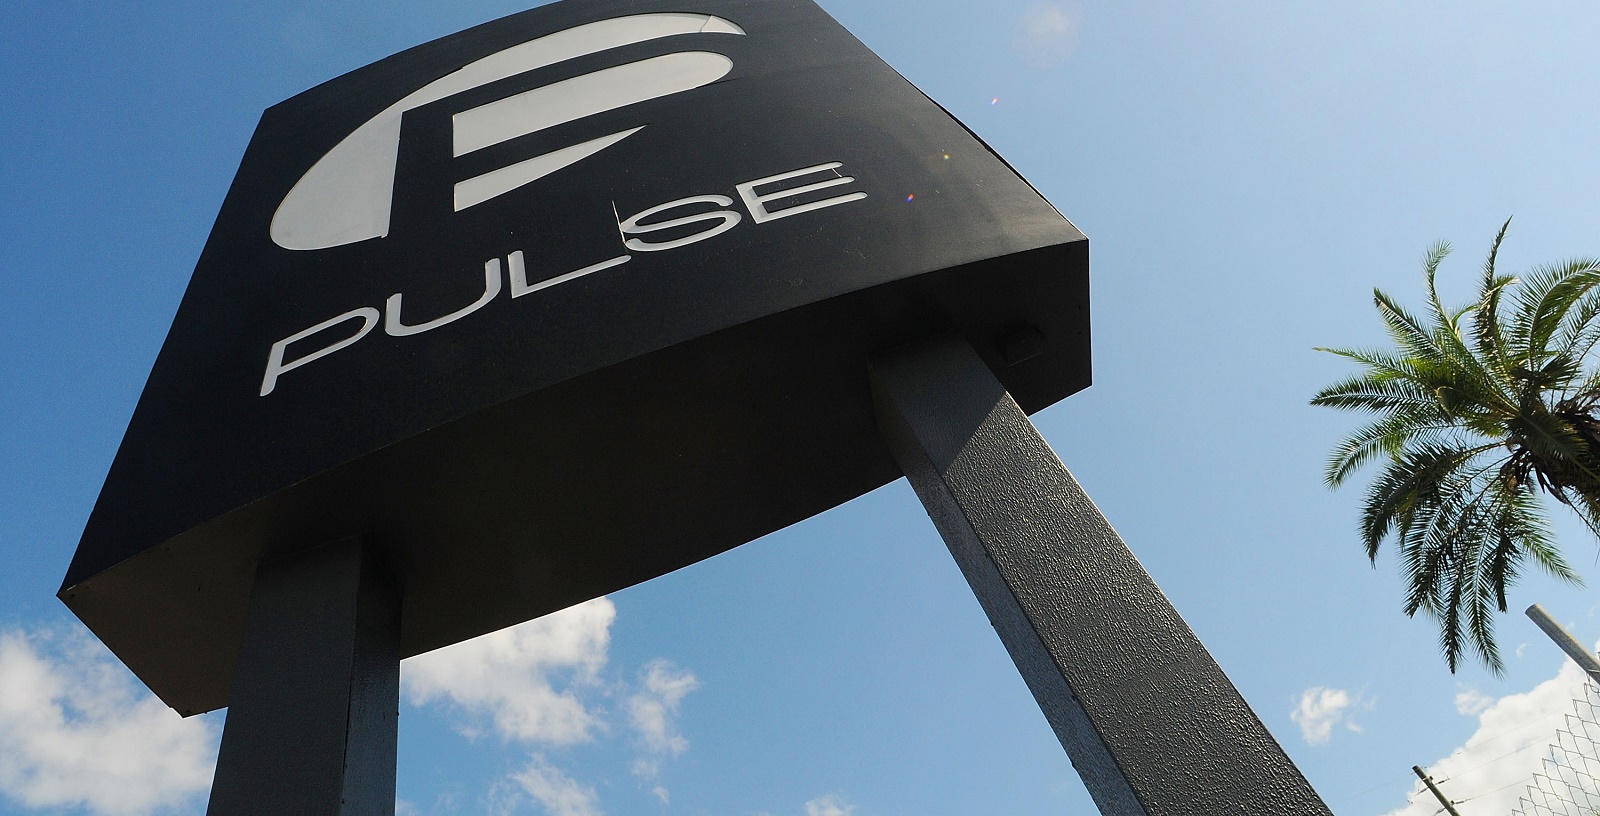 ORLANDO, FLORIDA - JUNE 21: A view of the Pulse Nightclub sign on June 21, 2016 in Orlando, Florida. Orlando community continues to mourn deadly mass shooting at gay club. The Orlando community continues to mourn the June 12 shooting at the Pulse nightclub in what is being called the worst mass shooting in American history, Omar Mir Seddique Mateen killed 49 people at the popular gay nightclub early last Sunday. Fifty-three people were wounded in the attack which authorities and community leaders are still trying to come to terms with. (Photo by Gerardo Mora/Getty Images)